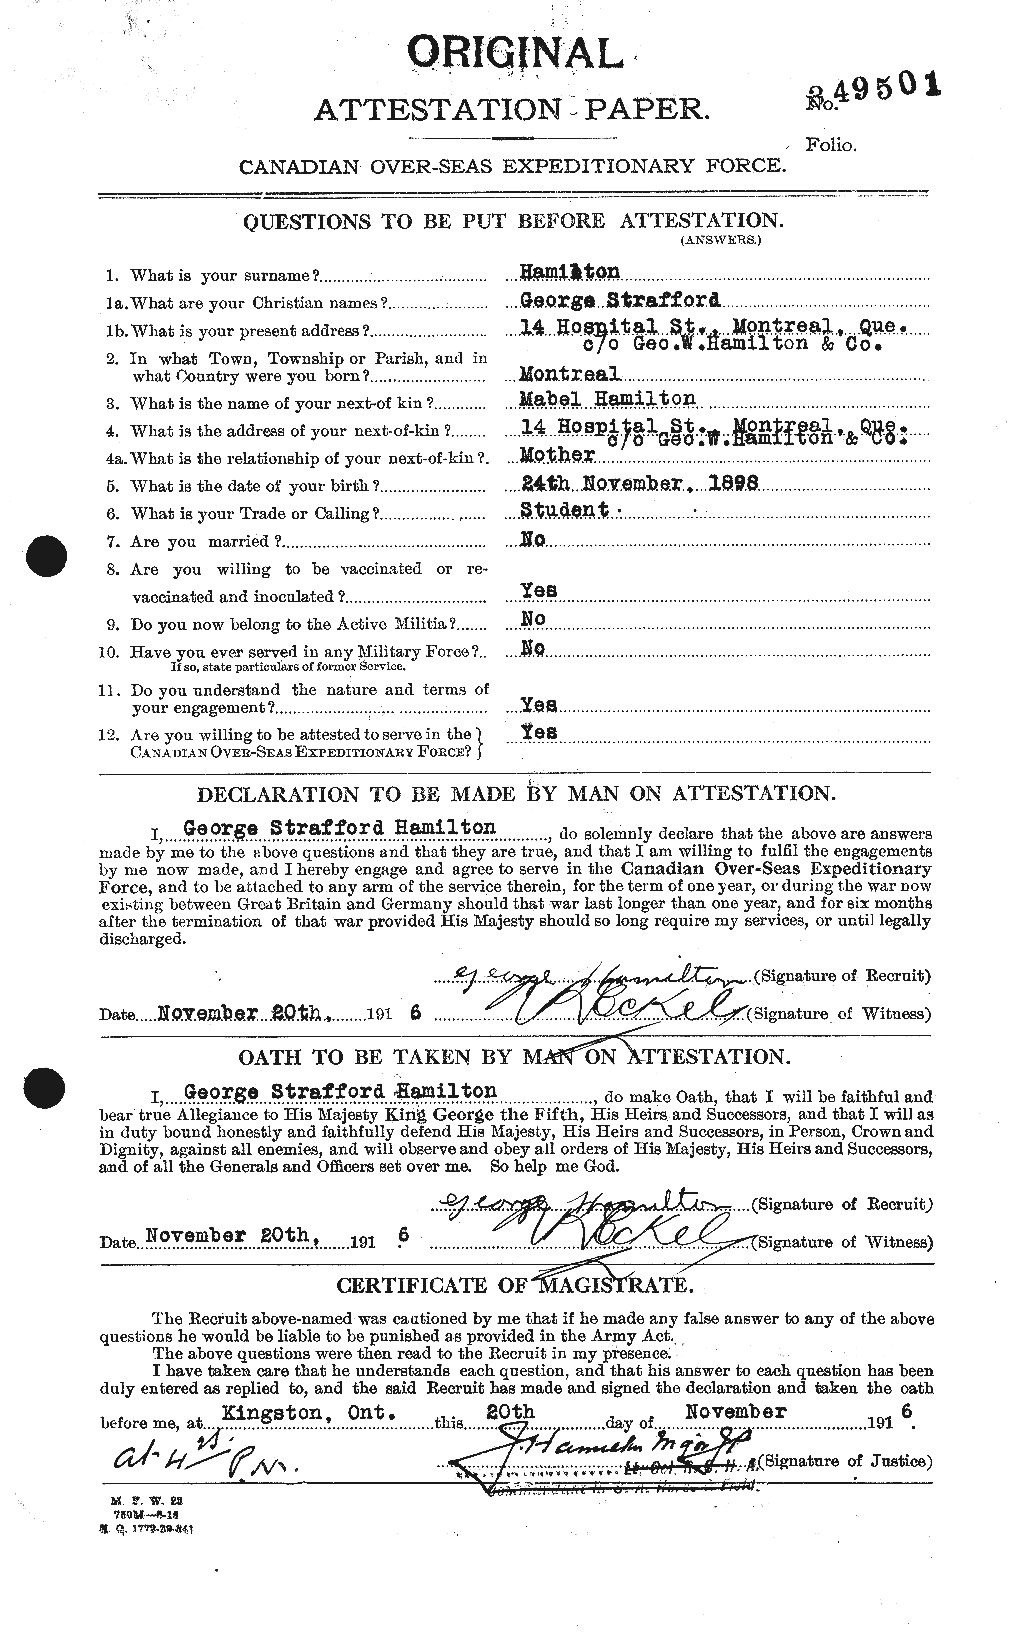 Personnel Records of the First World War - CEF 372473a